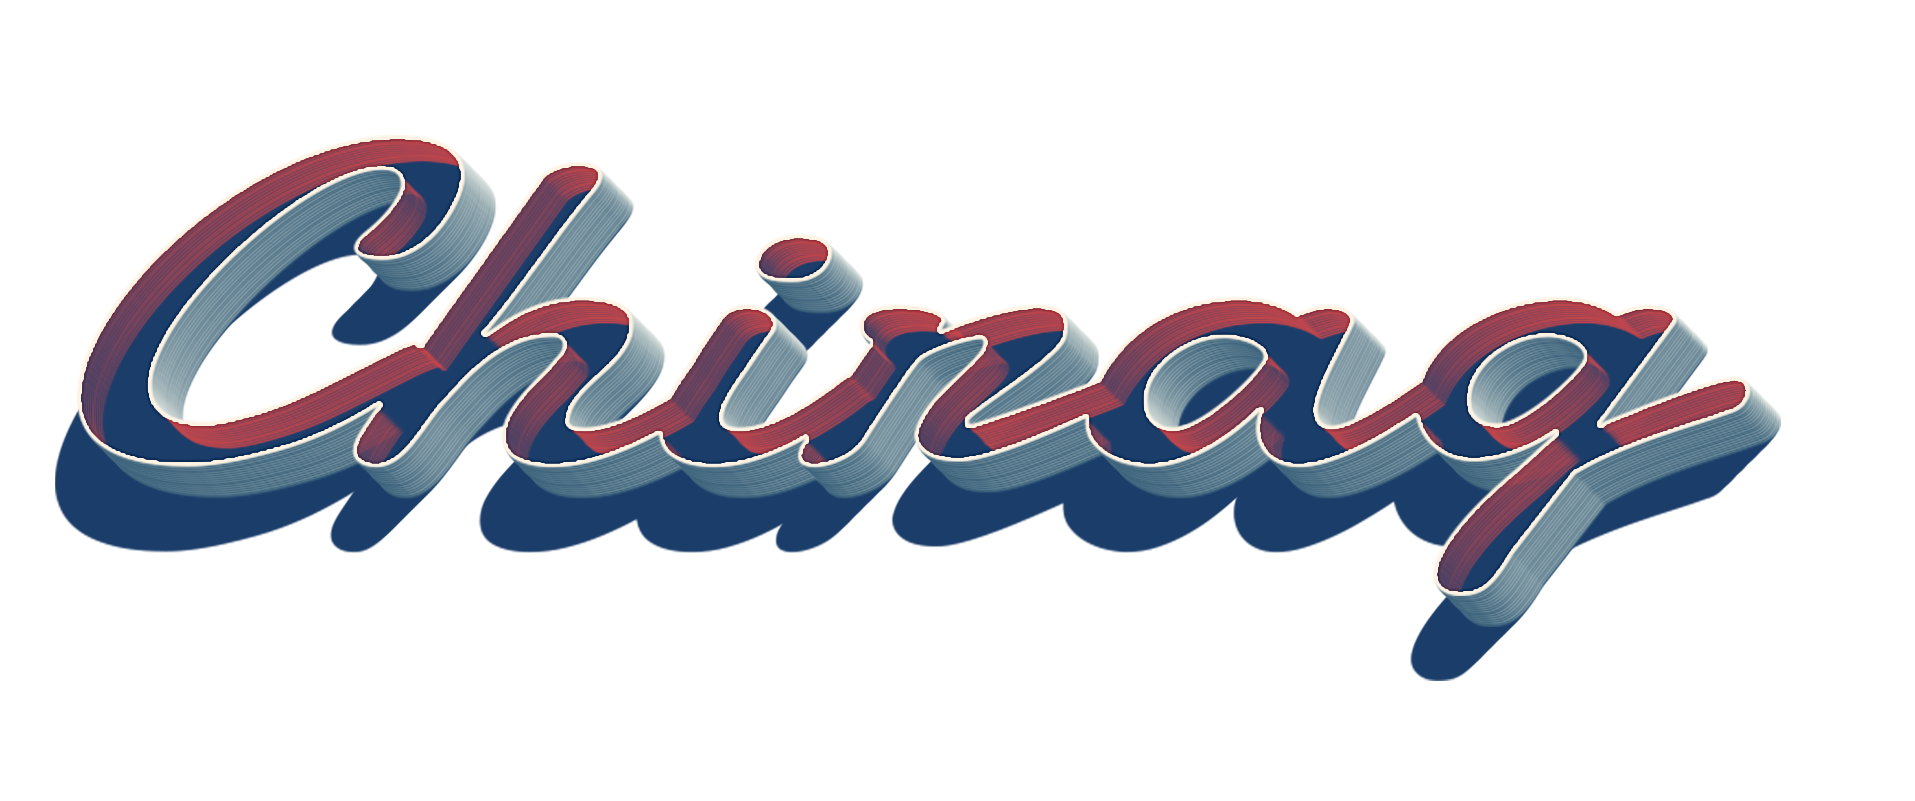 Chirag 3d Letter Png Name - Graphic Design - HD Wallpaper 